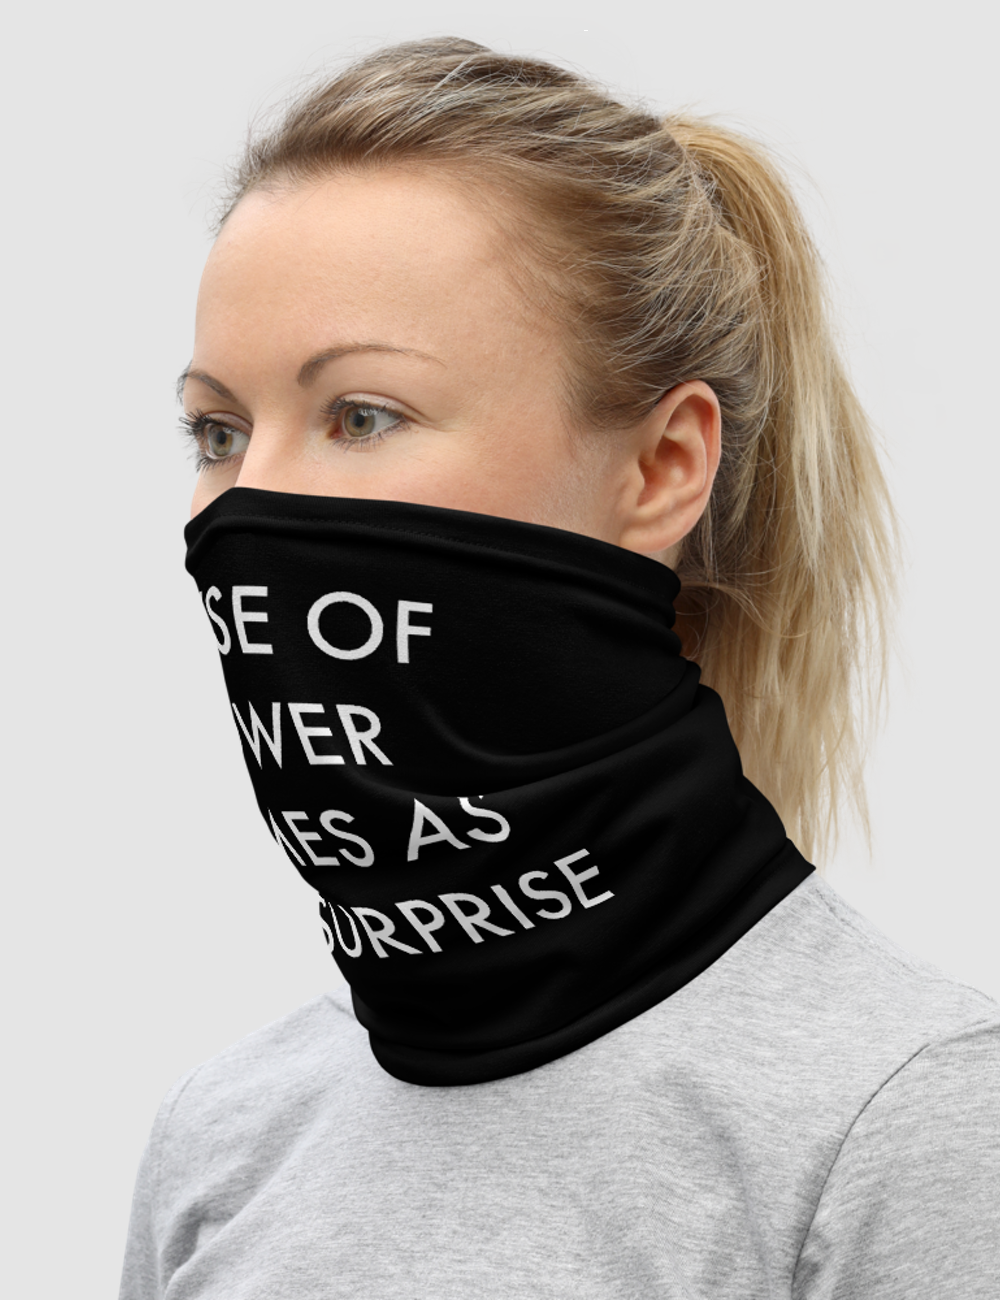 Abuse Of Power Comes As No Surprise | Neck Gaiter Face Mask OniTakai